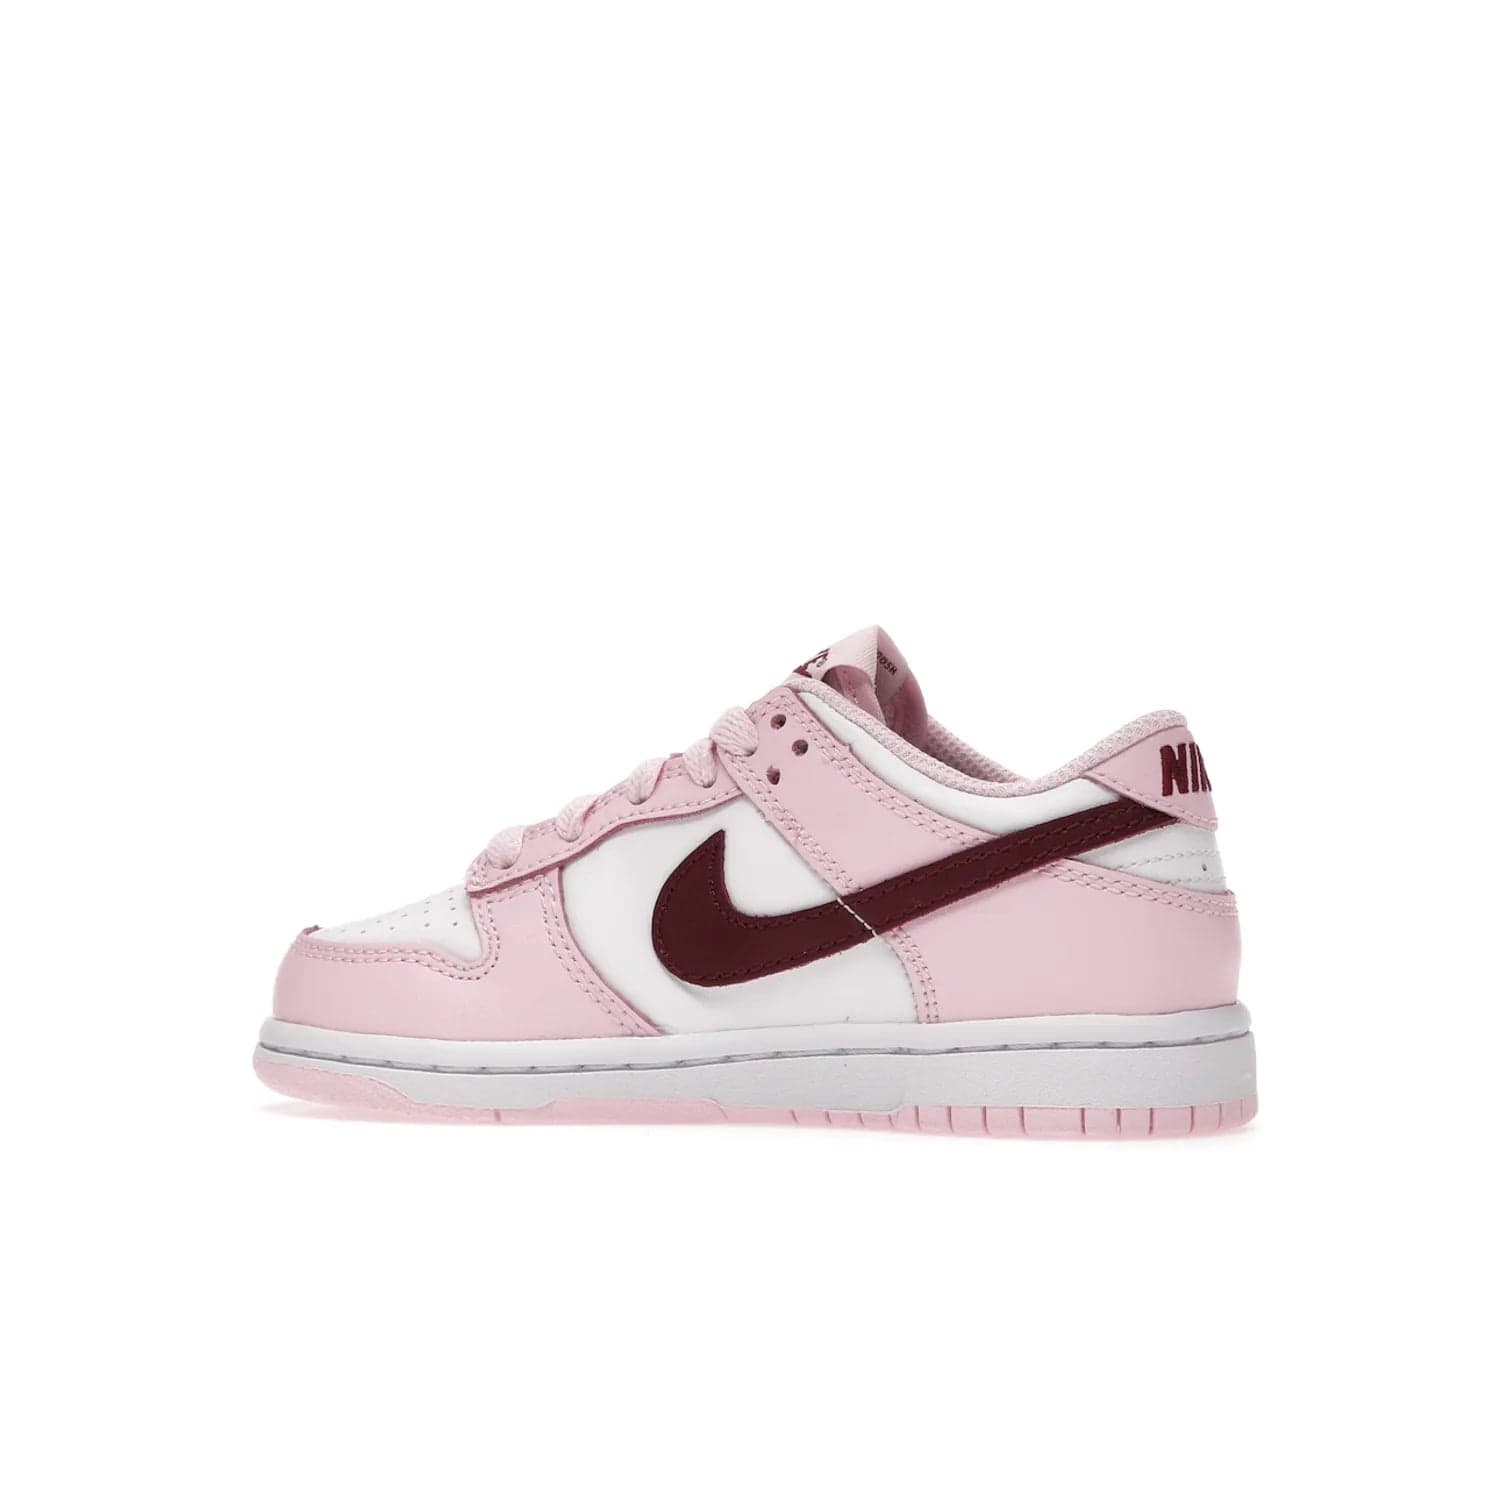 Nike Dunk Low Pink Red White (PS) - Image 21 - Only at www.BallersClubKickz.com - Introducing the Nike Dunk Low Pink Red White (PS), the perfect addition to your sneaker collection. A classic silhouette with modern vibrant colors, including a pink upper with red and white accents and a white midsole. Comfort and durability, perfect for any outfit. Limited edition, available June 22nd.